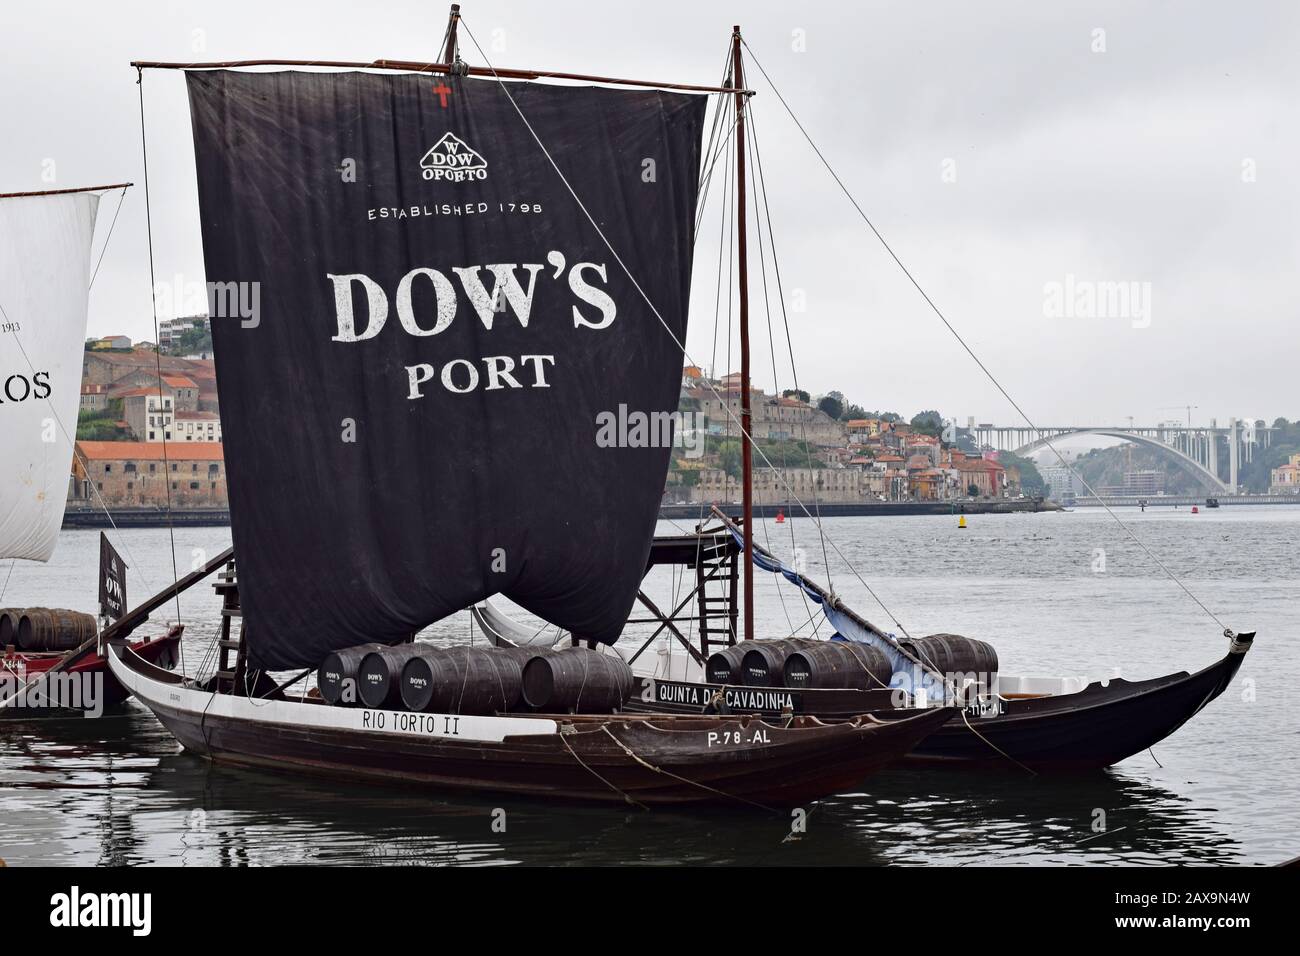 Dow's port rabelo boat moored on the riverside of the Douro river in Gaia Porto. Black sail raised and billowing with Porto and bridge in background Stock Photo